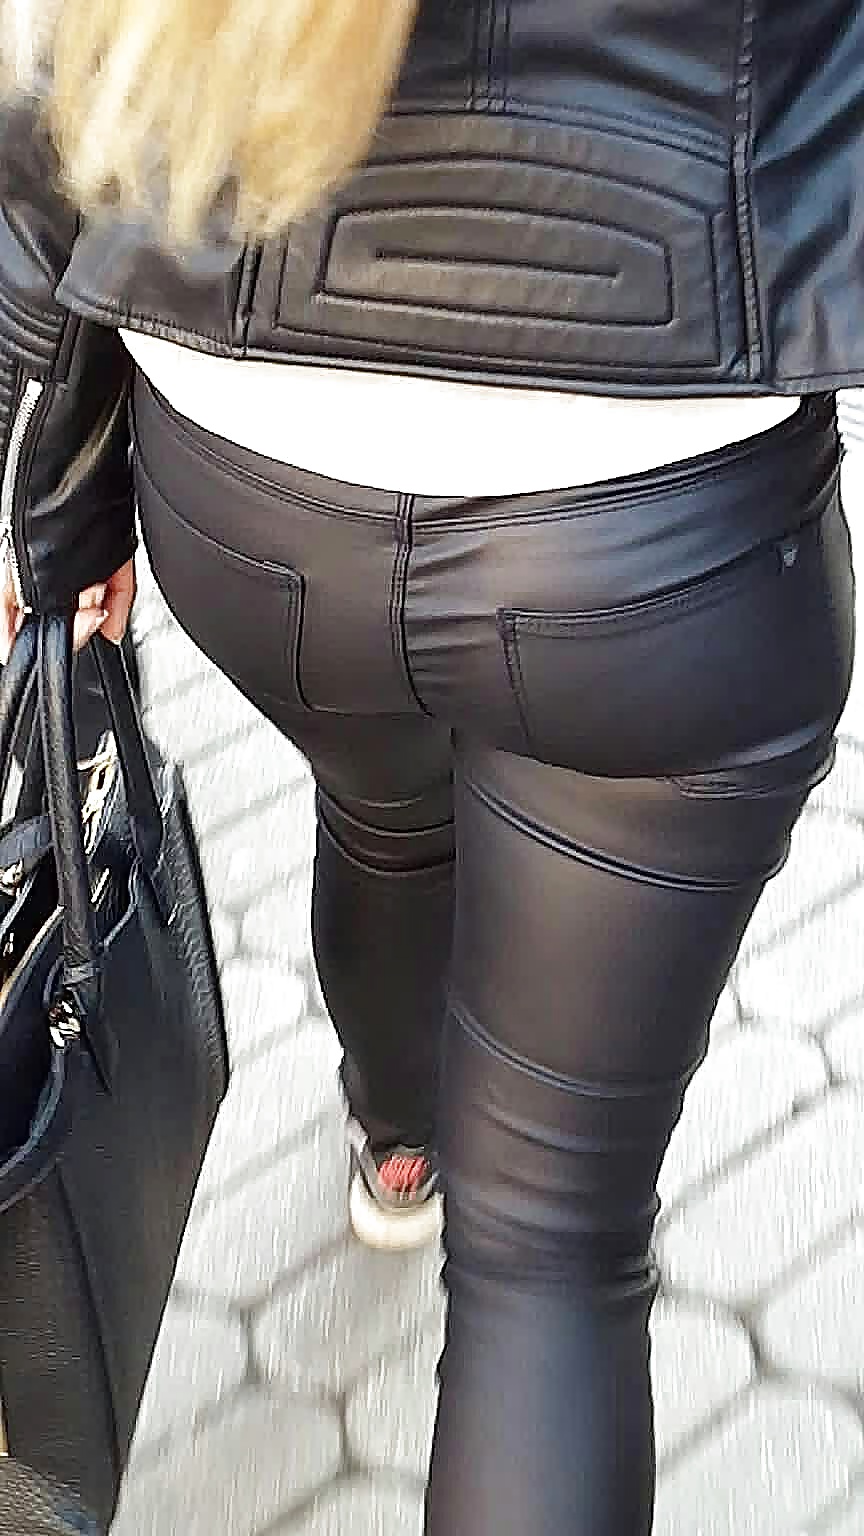 Leather legs & butts (12/15)